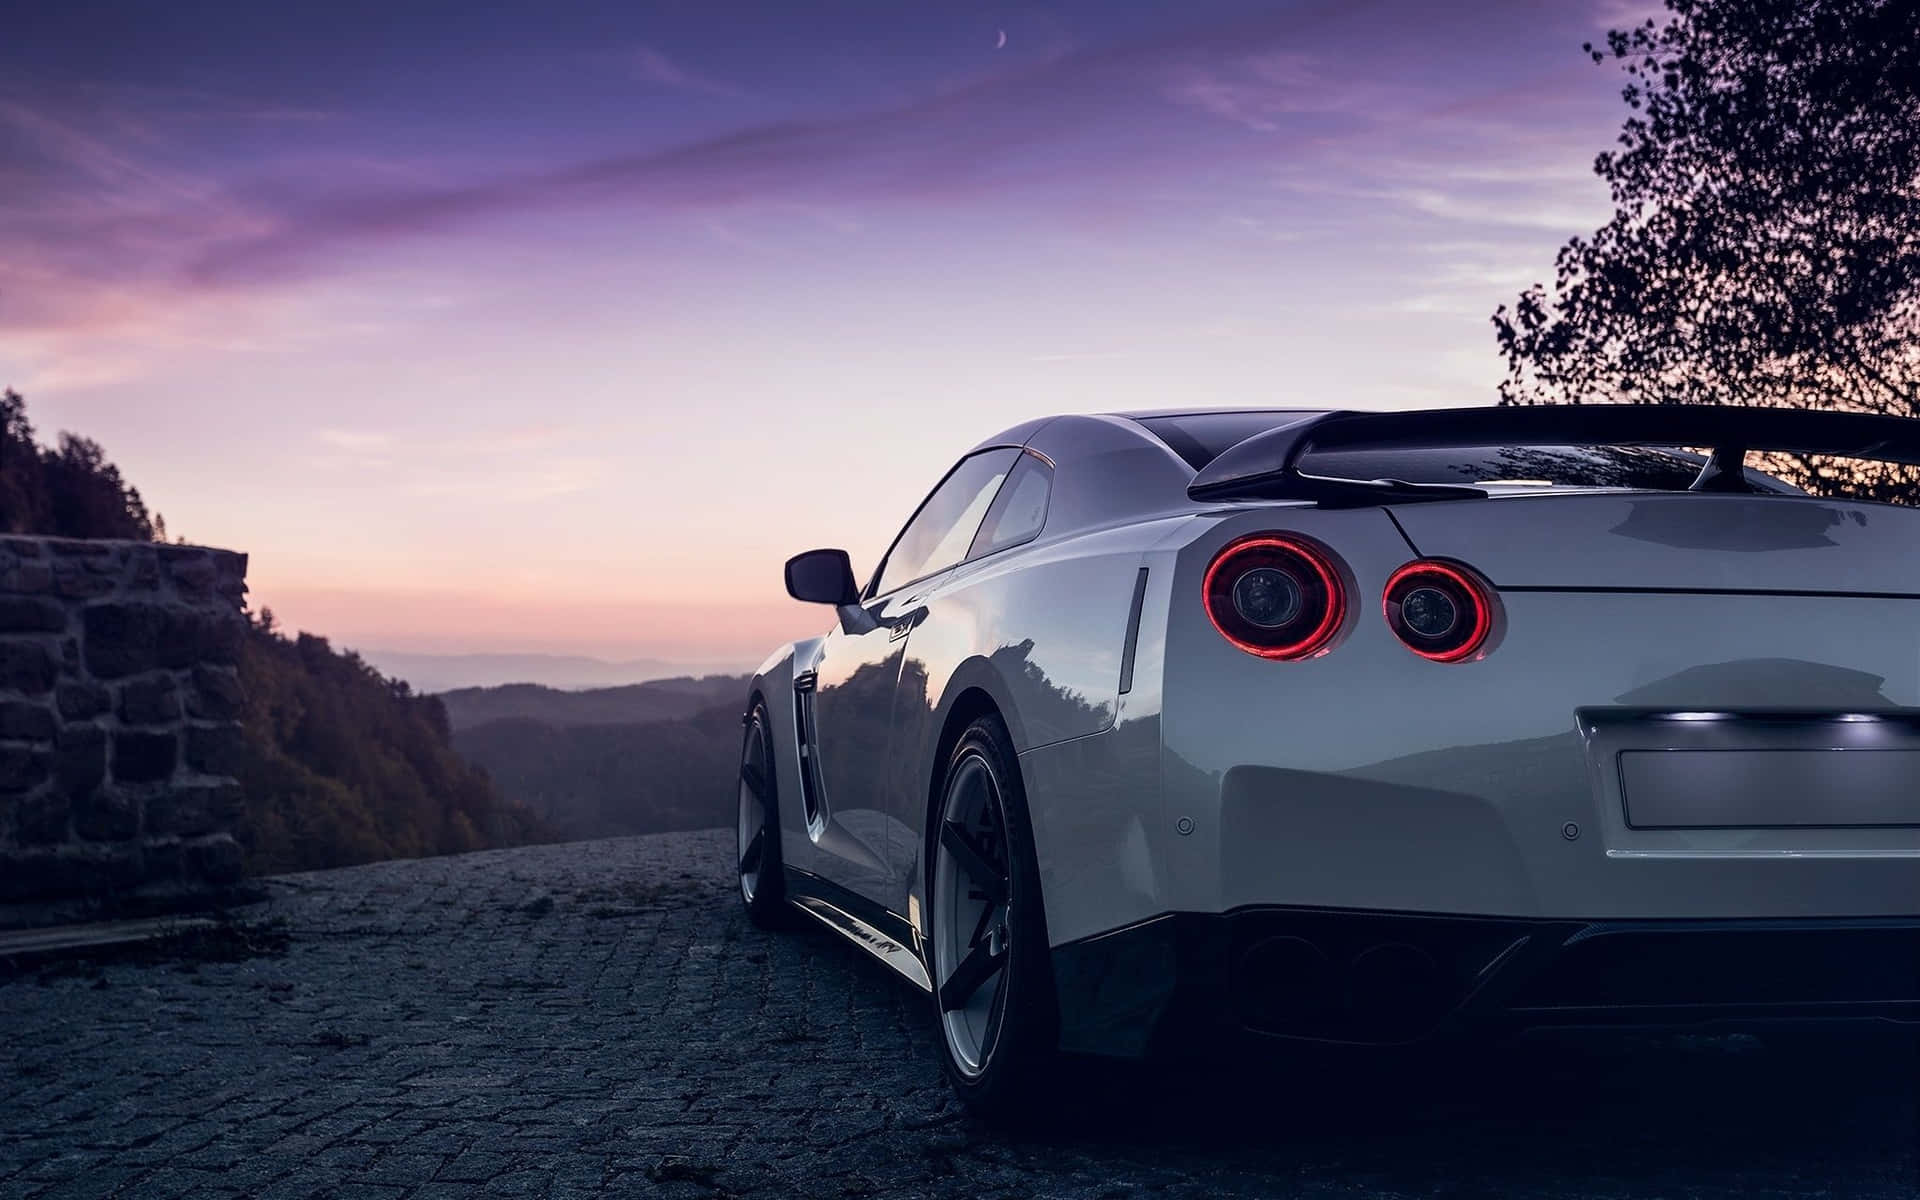 A White Sports Car Parked On A Road At Sunset Wallpaper